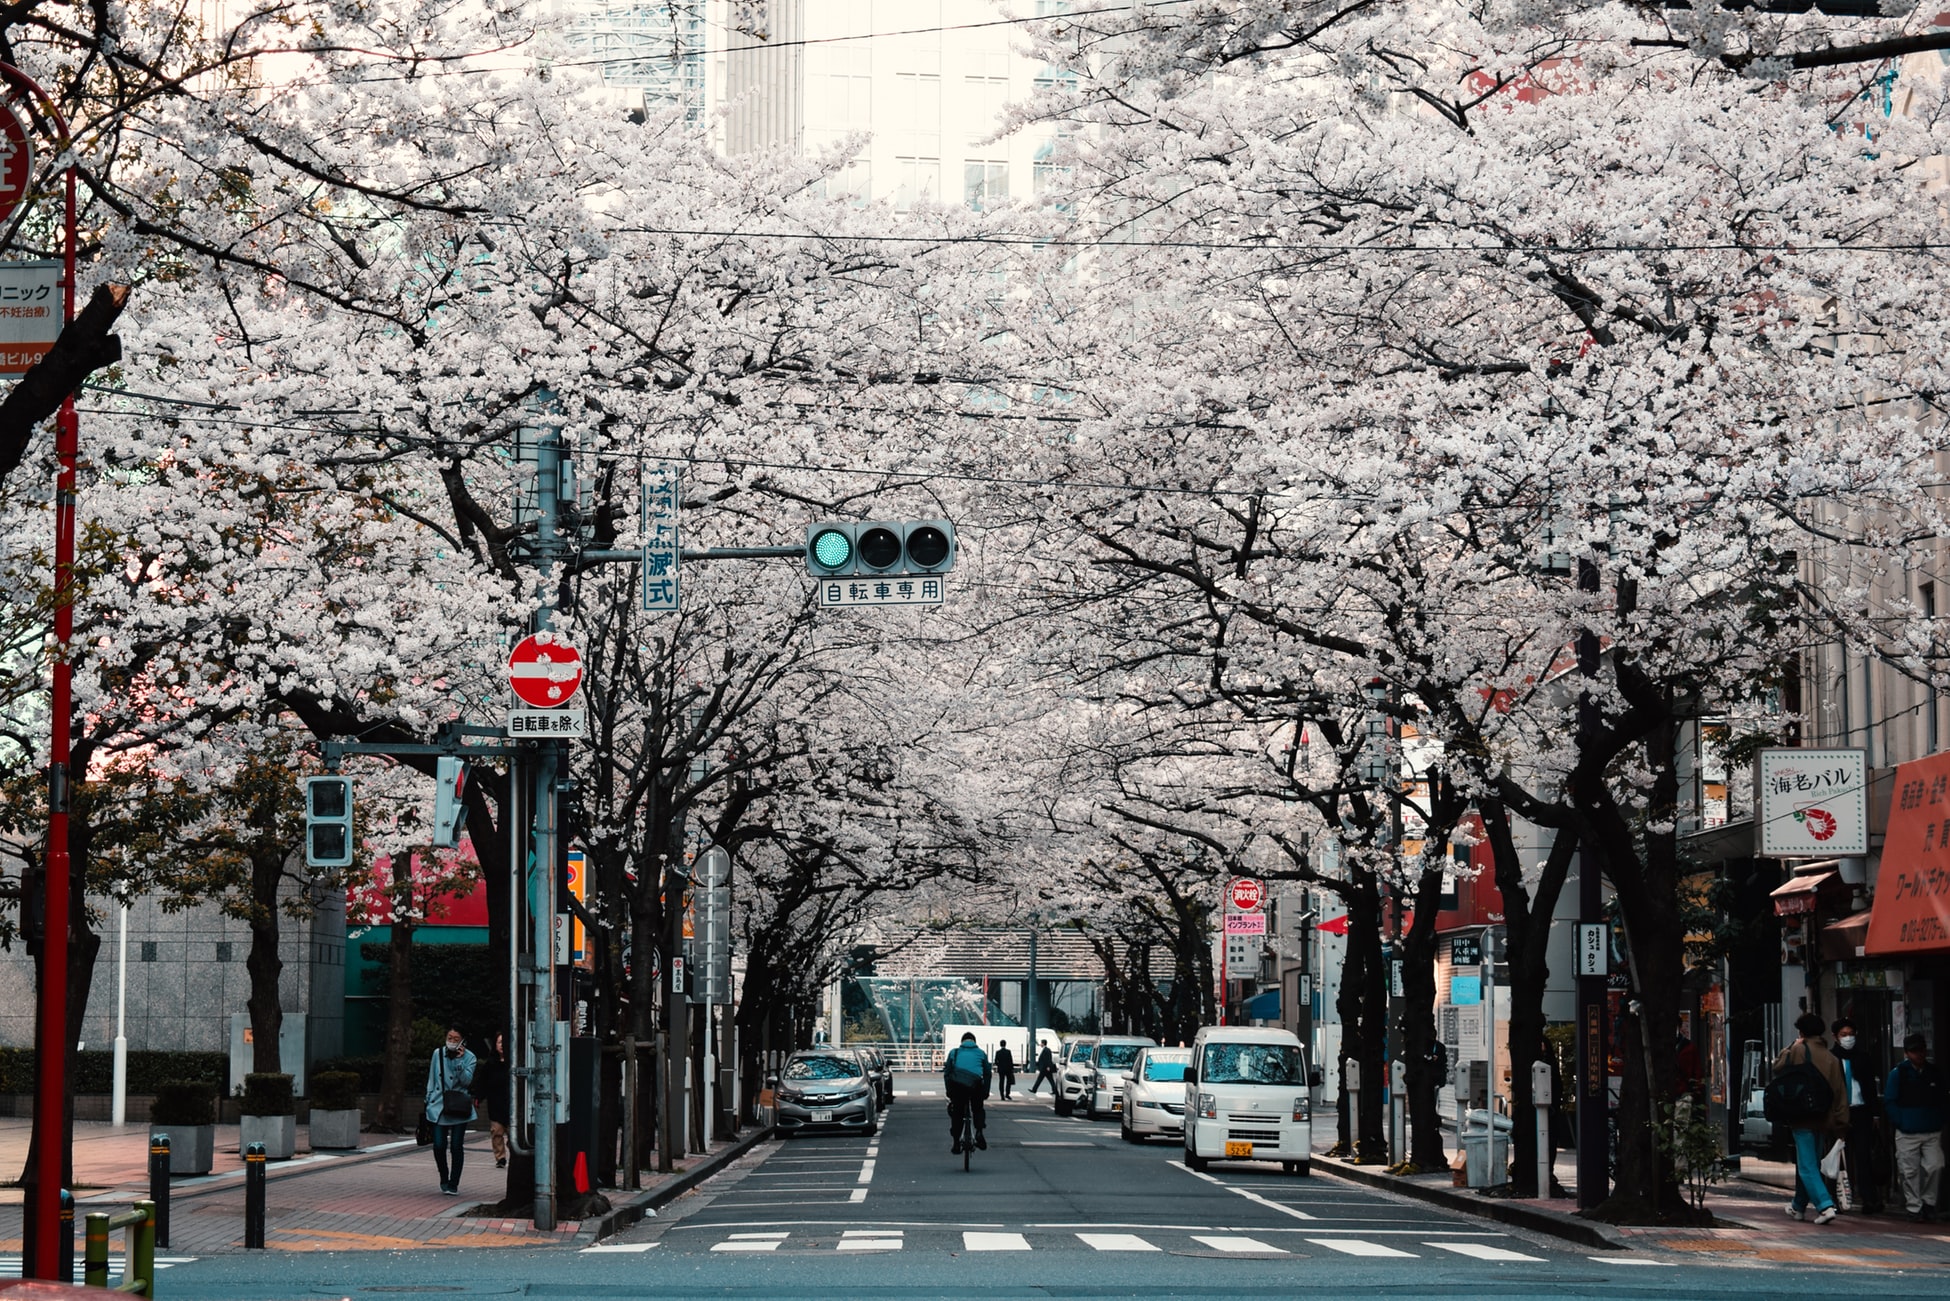 street lined with cherry blossom trees